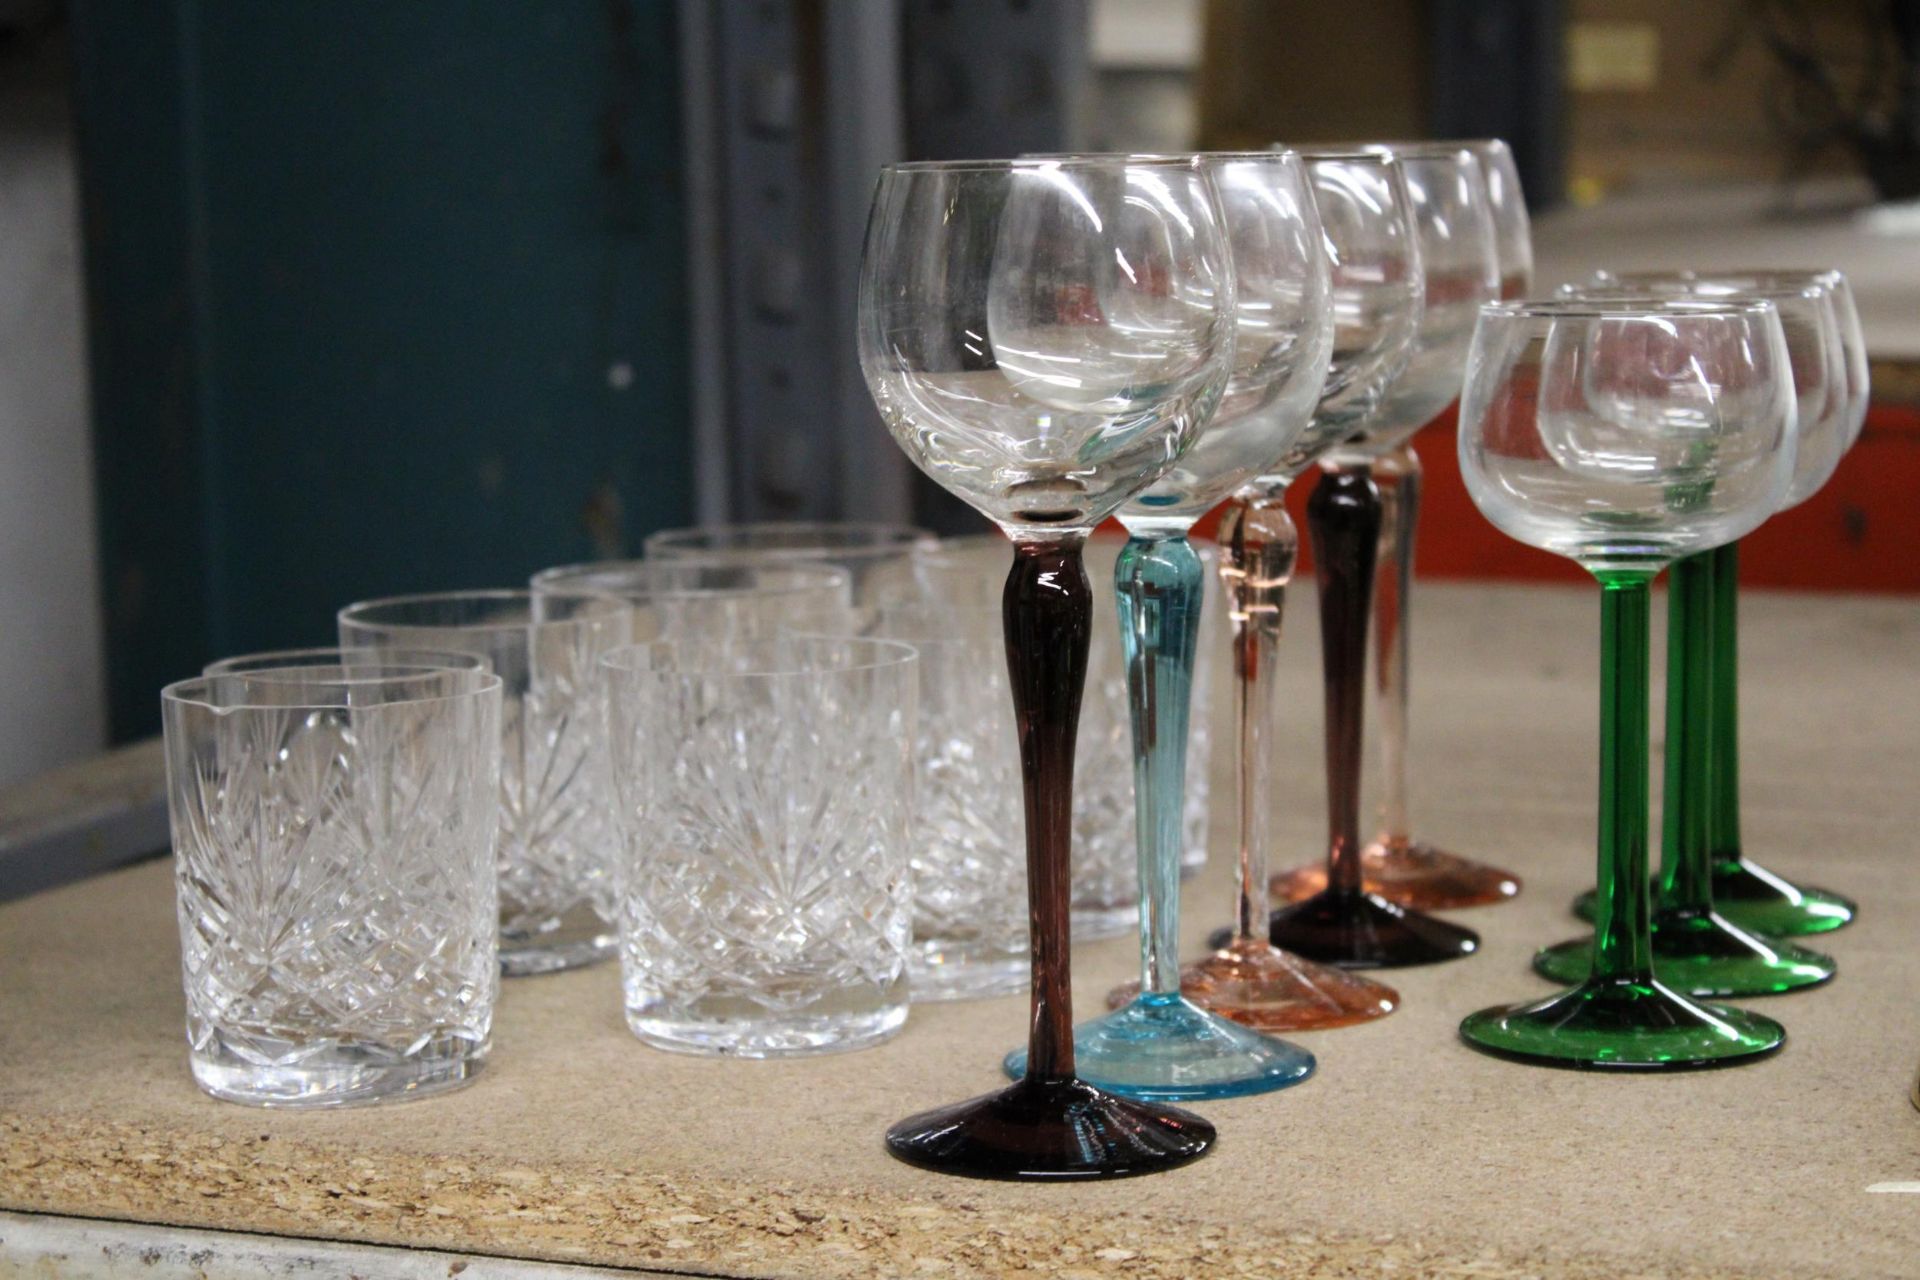 A QUANTITY OF WINE GLASSES WITH COLOURED STEMS AND CUT GLASS TUMBLERS